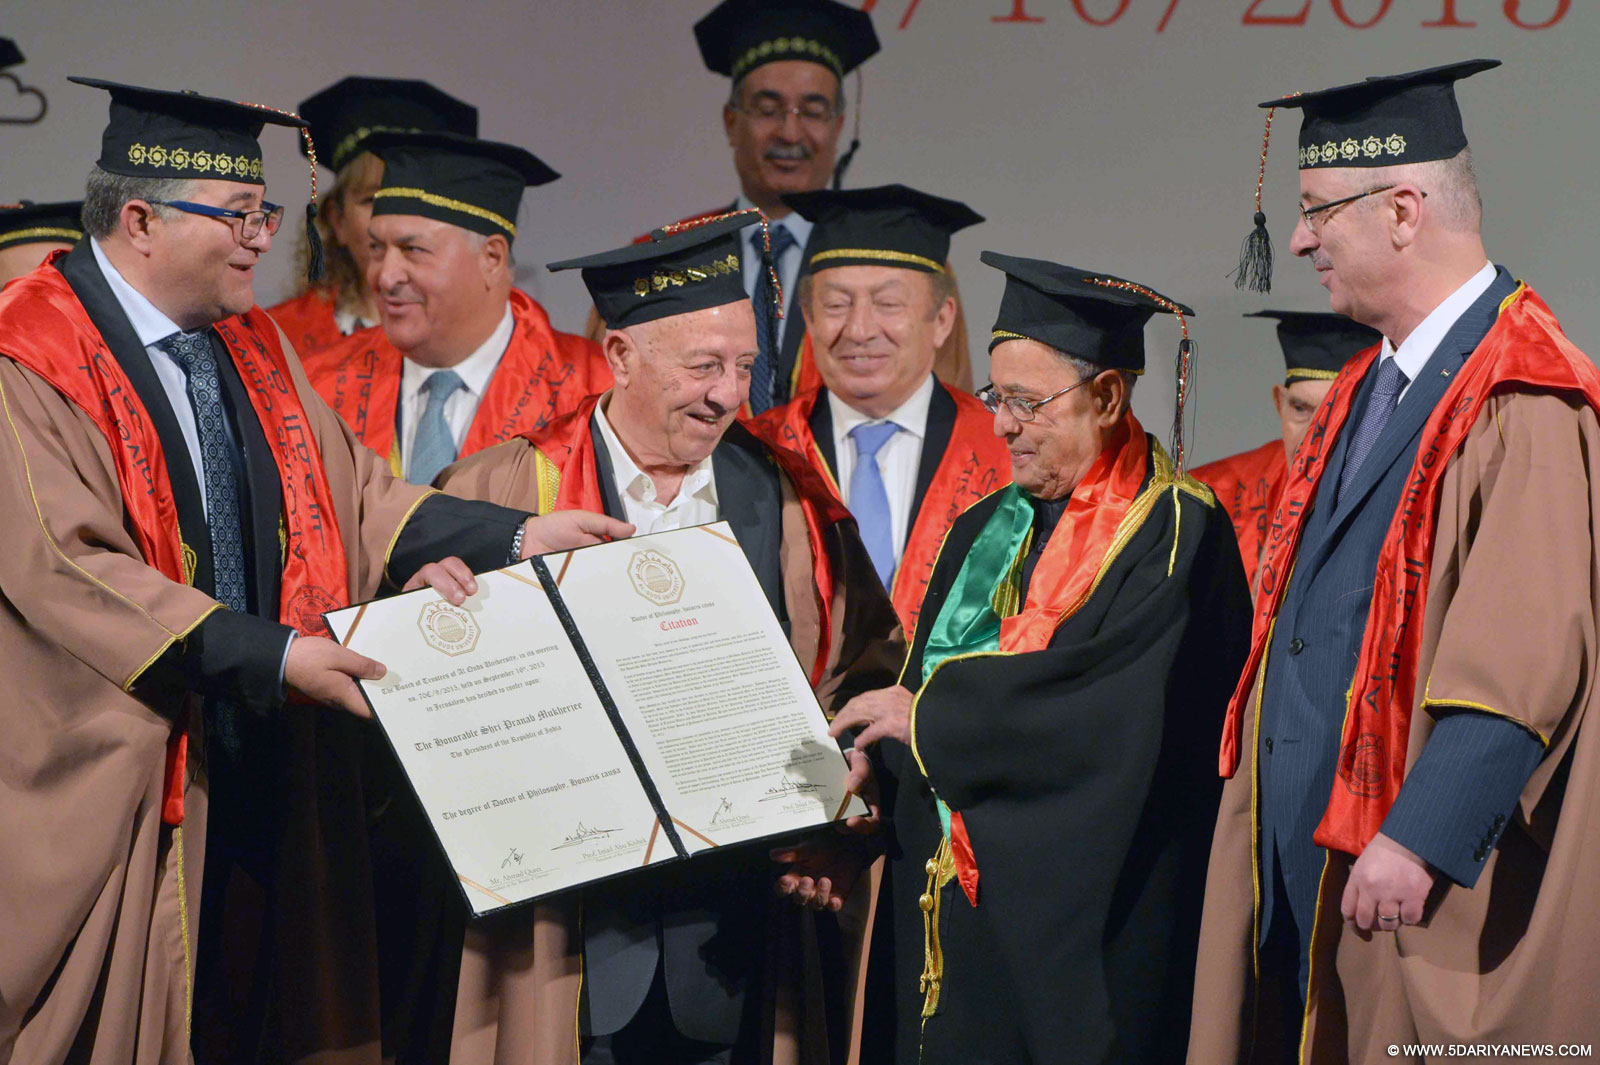 President Pranab Mukherjee during conferment of Honorary Doctorate, at Al-Quds University, Abu Dees, in Palestine by the Prime Minister of Palestine, on Oct 13, 2015